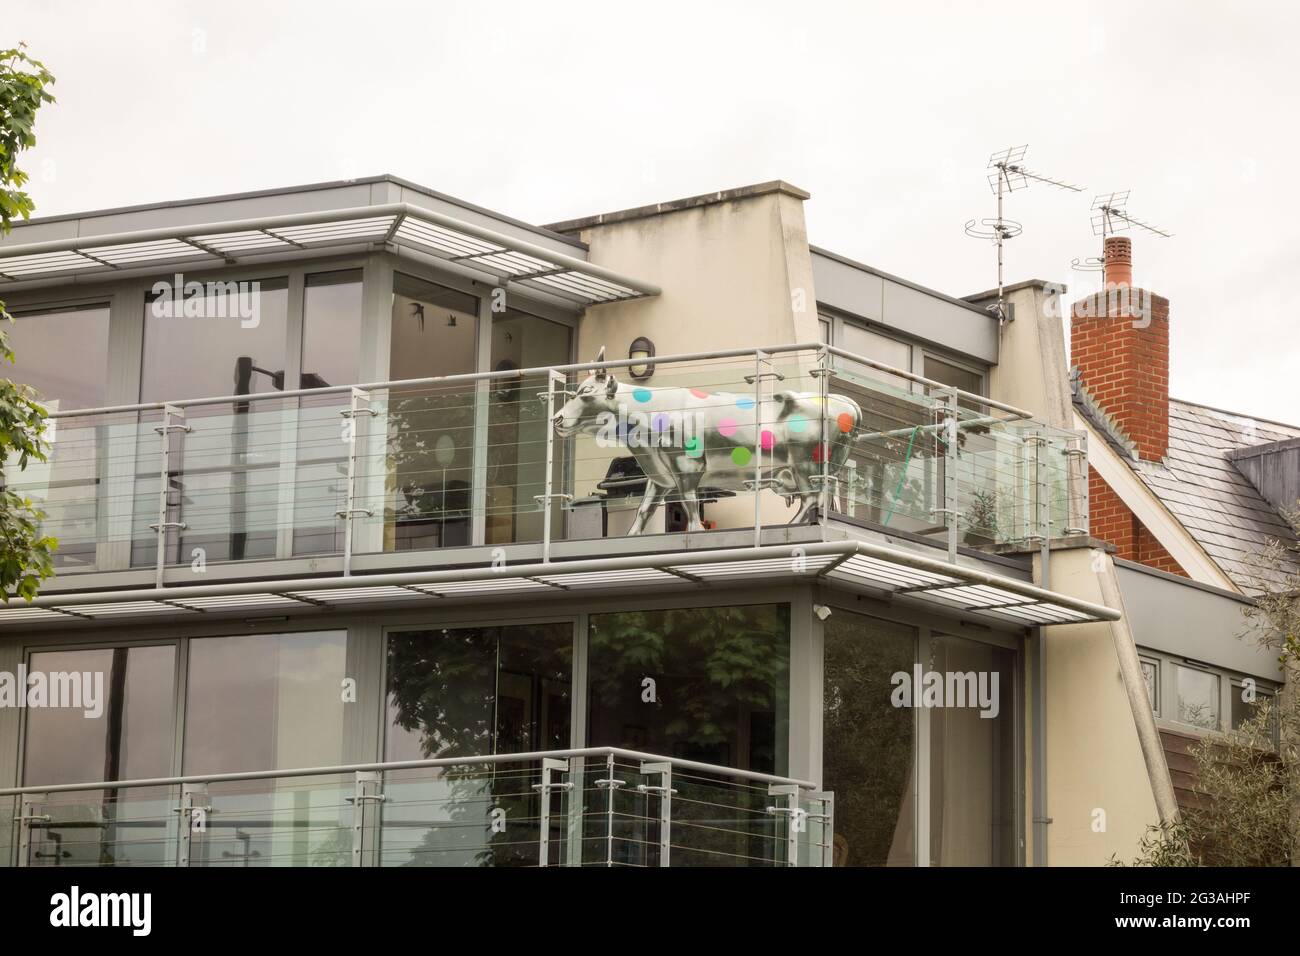 A colourful Salt Beef cow sculpture from the Cow Parade adorns a balcony on a house in Barnes, southwest London, England U.K. Stock Photo